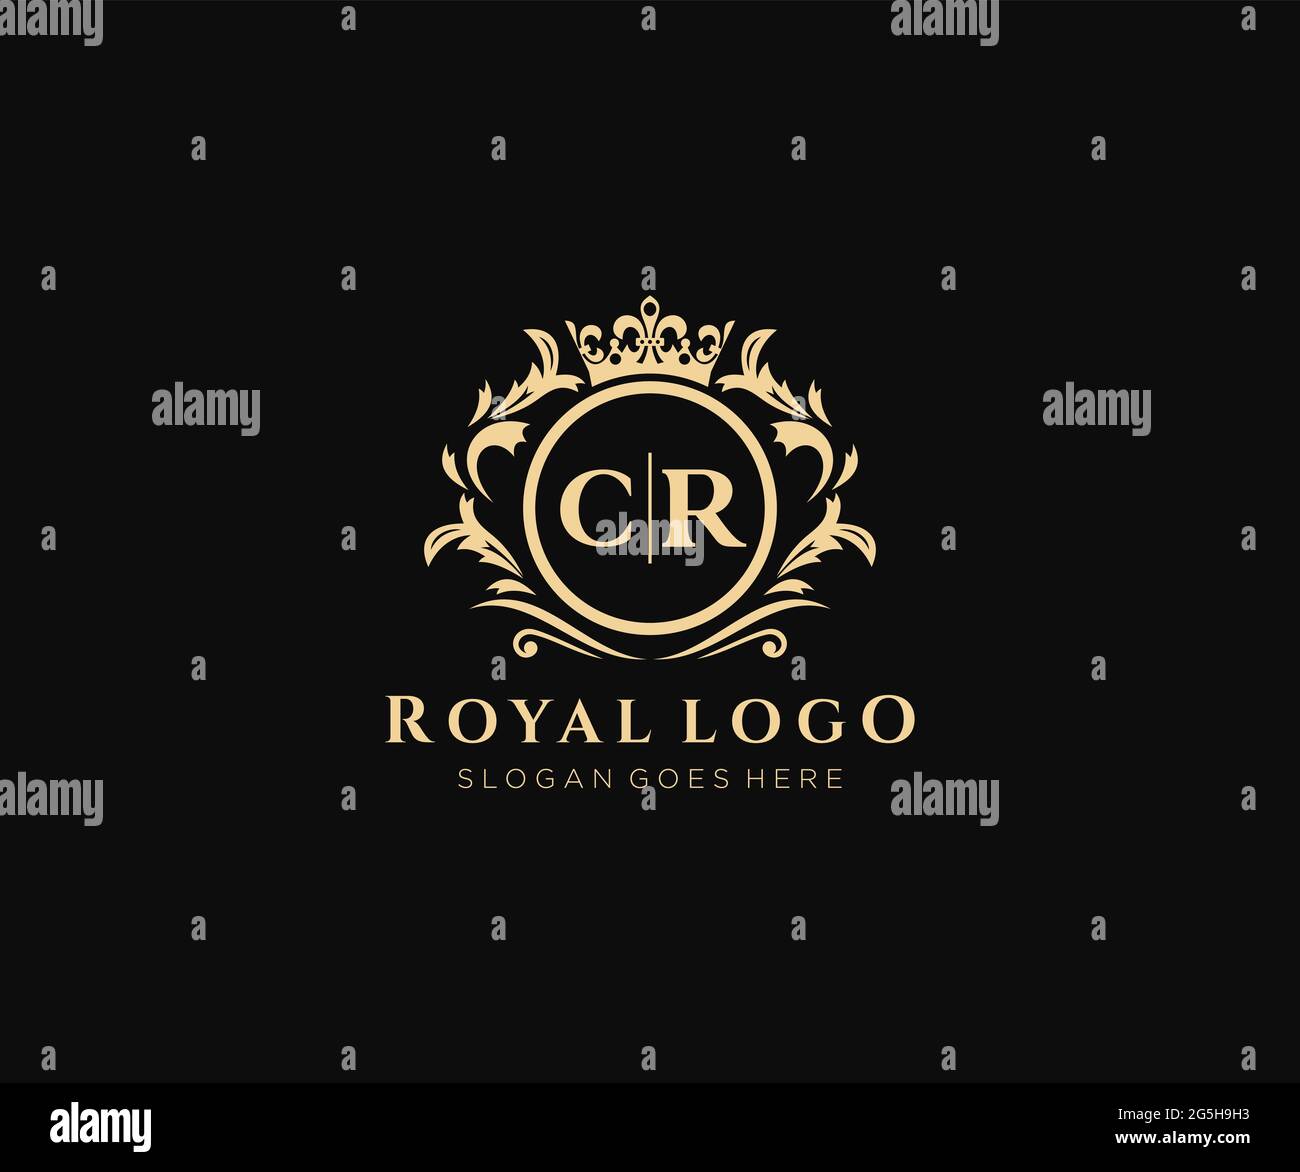 CR Letter Luxurious Brand Logo Template, for Restaurant, Royalty, Boutique, Cafe, Hotel, Heraldic, Jewelry, Fashion and other vector illustration. Stock Vector